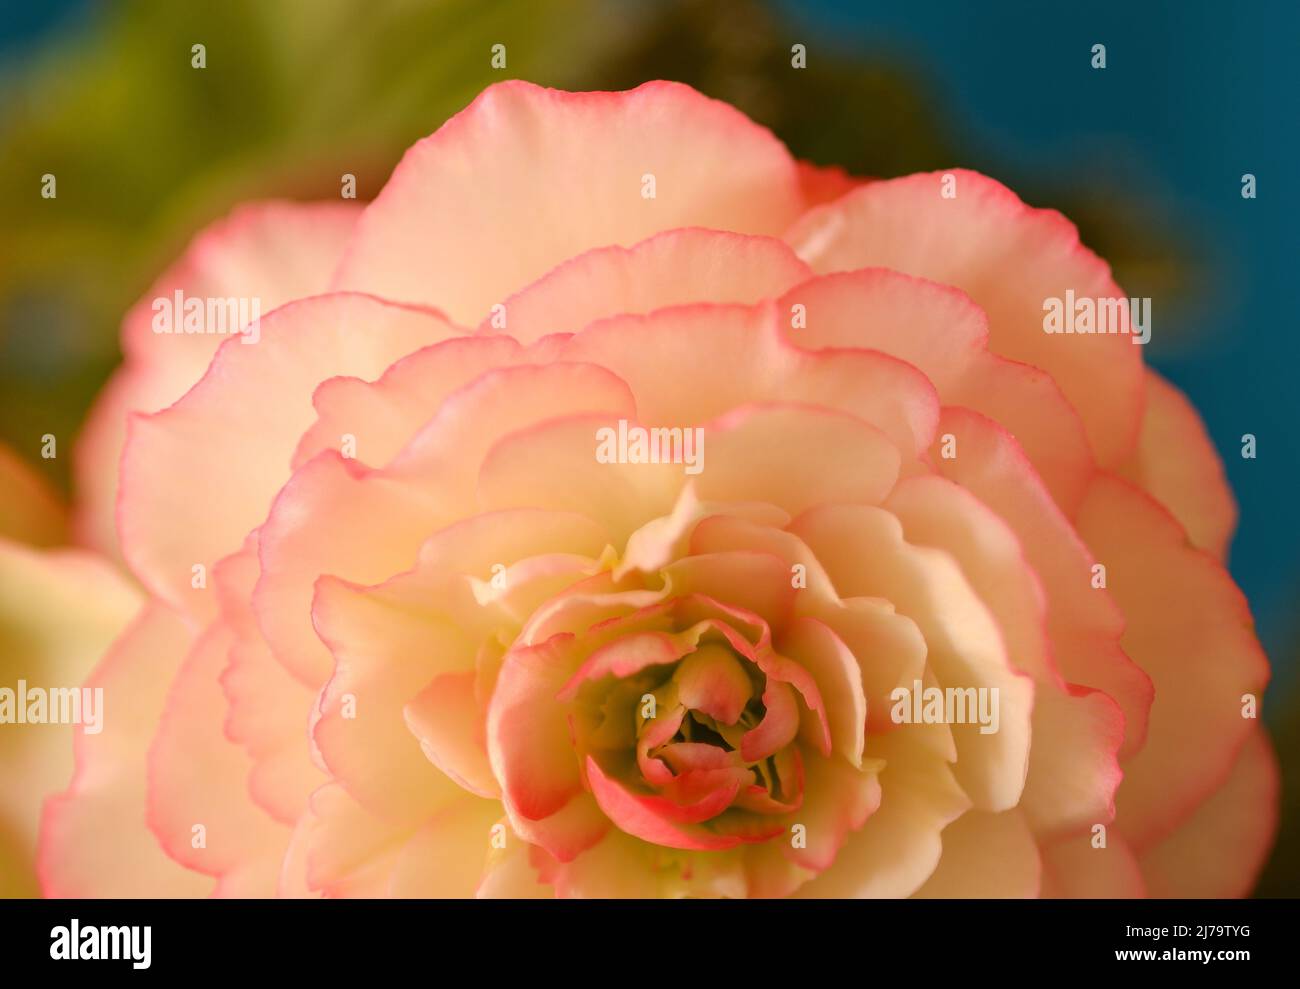 Pink and white Rose Picotee Begonia with yellow center on blue and green background Stock Photo